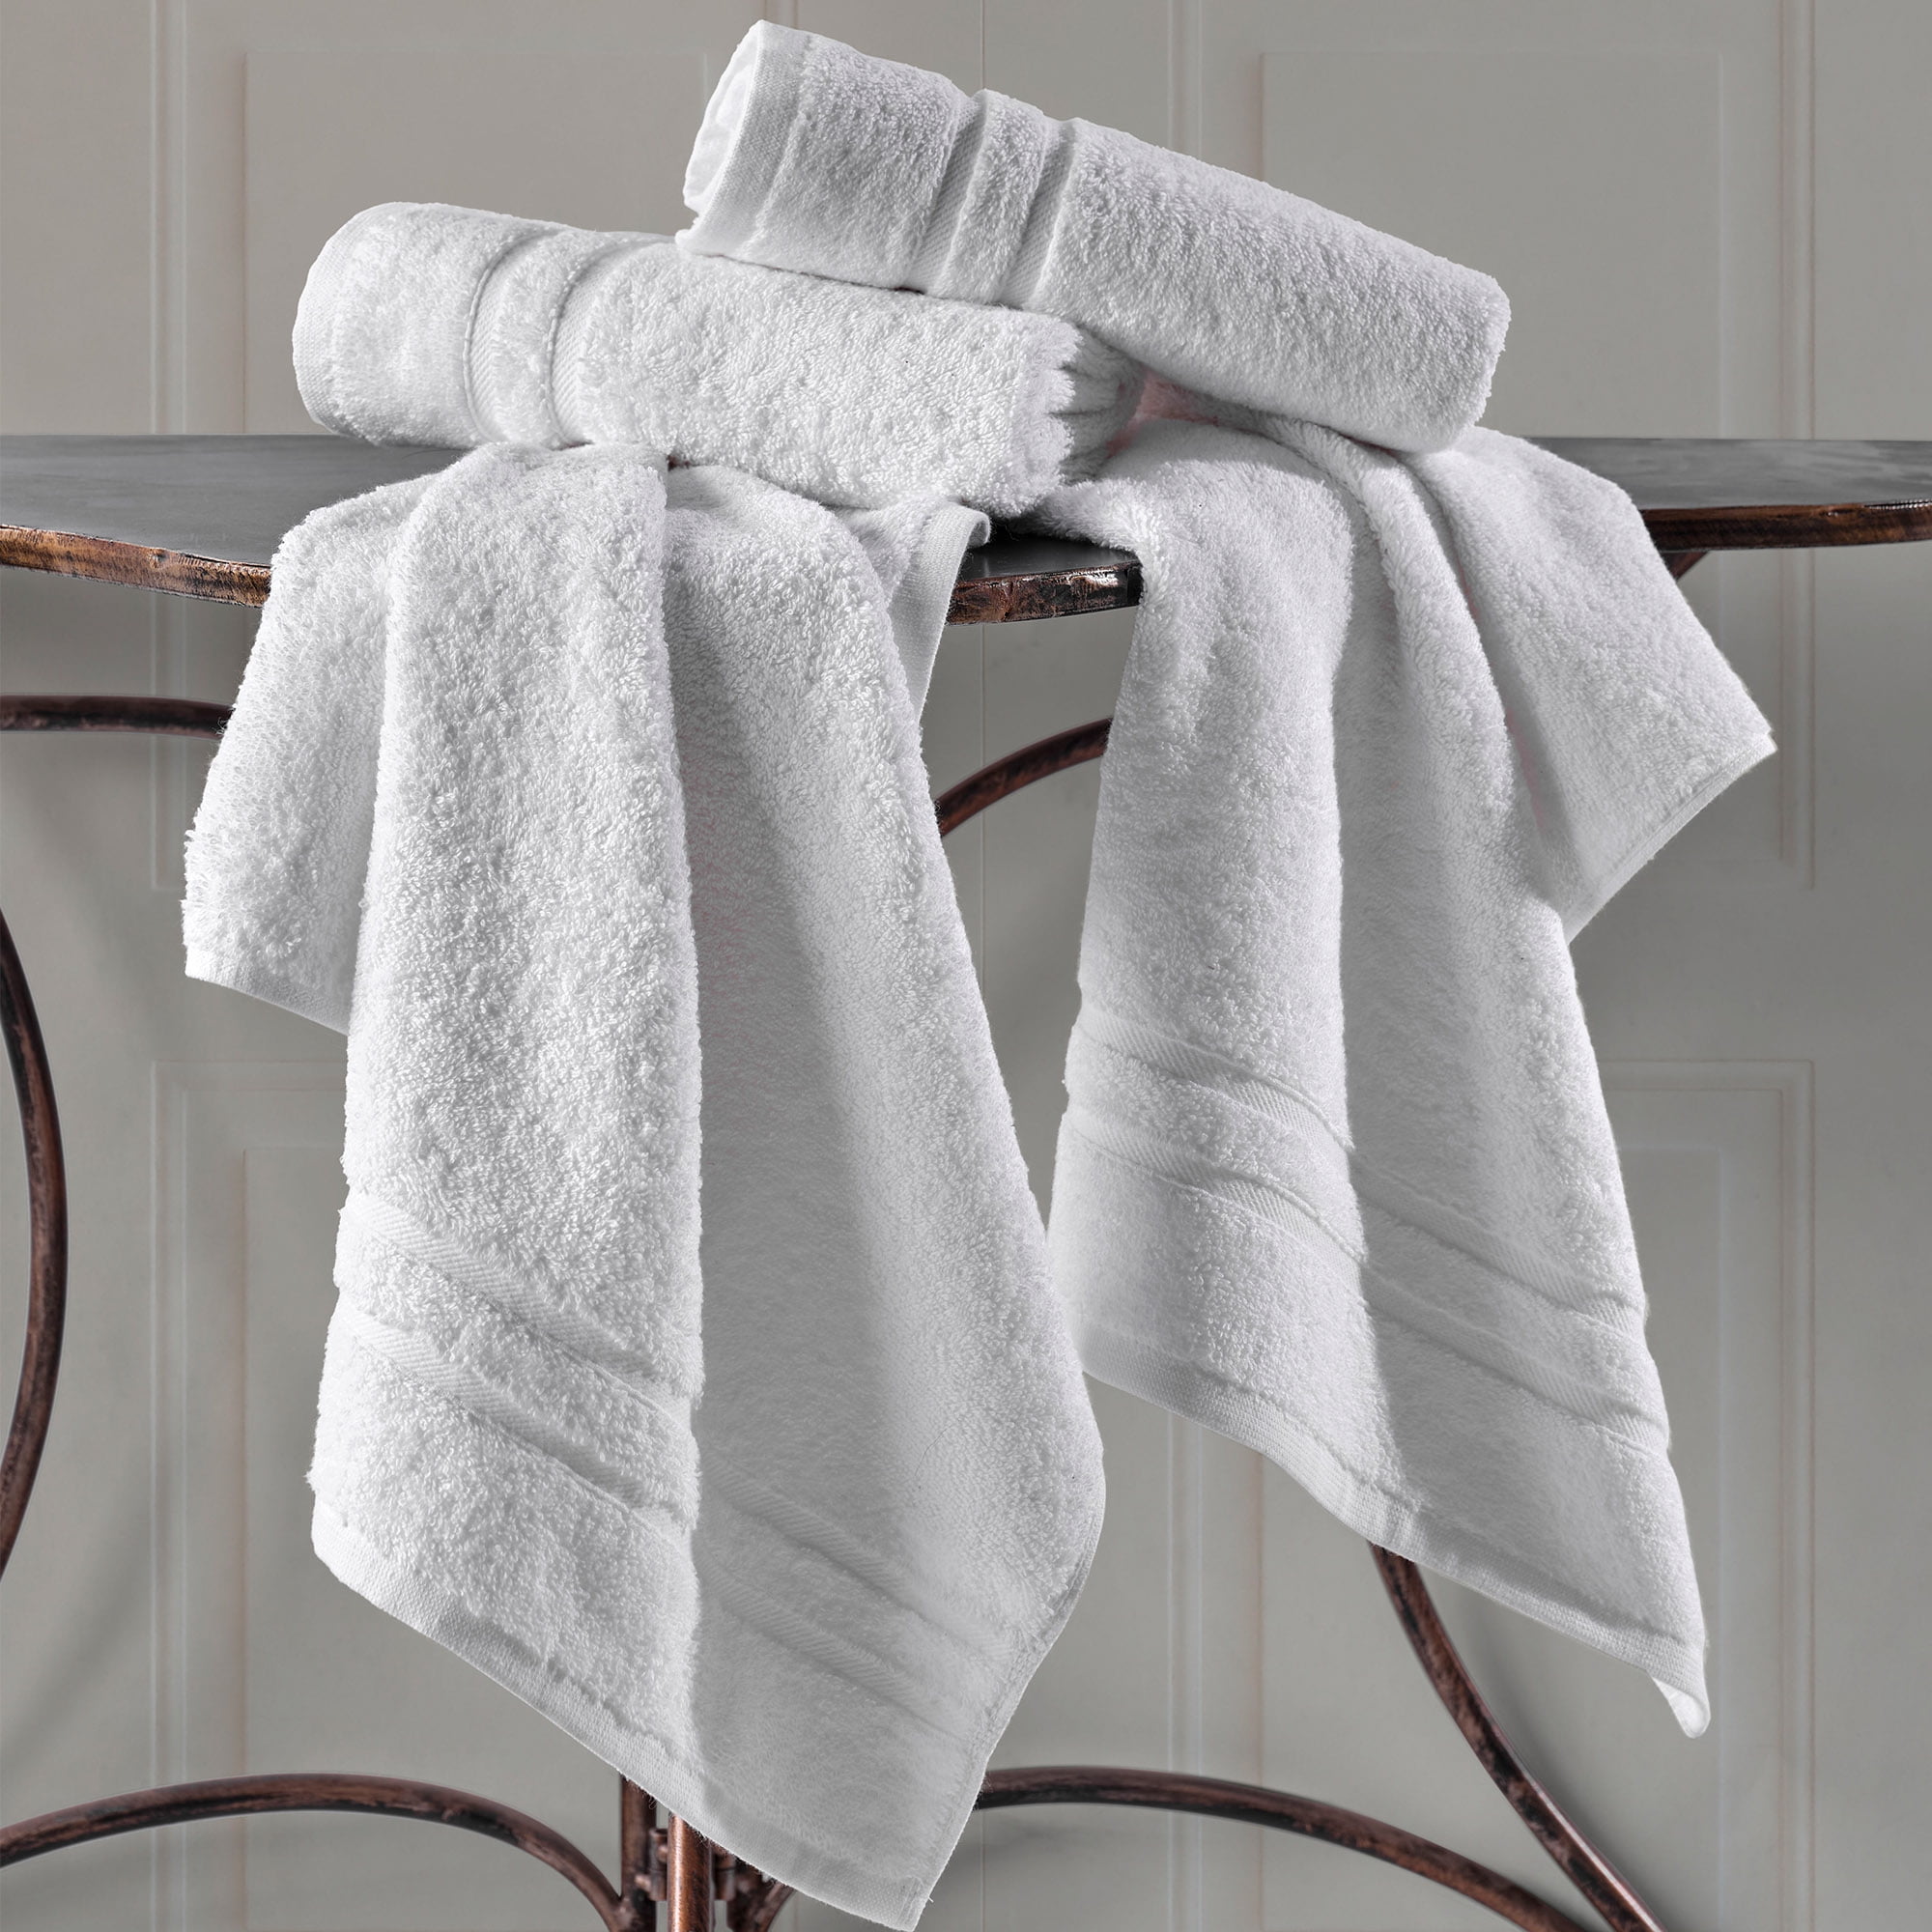 Hammam Linen Hand Towels Set Cool Grey Soft Fluffy, Absorbent and Quick Dry  Perfect for Daily Use